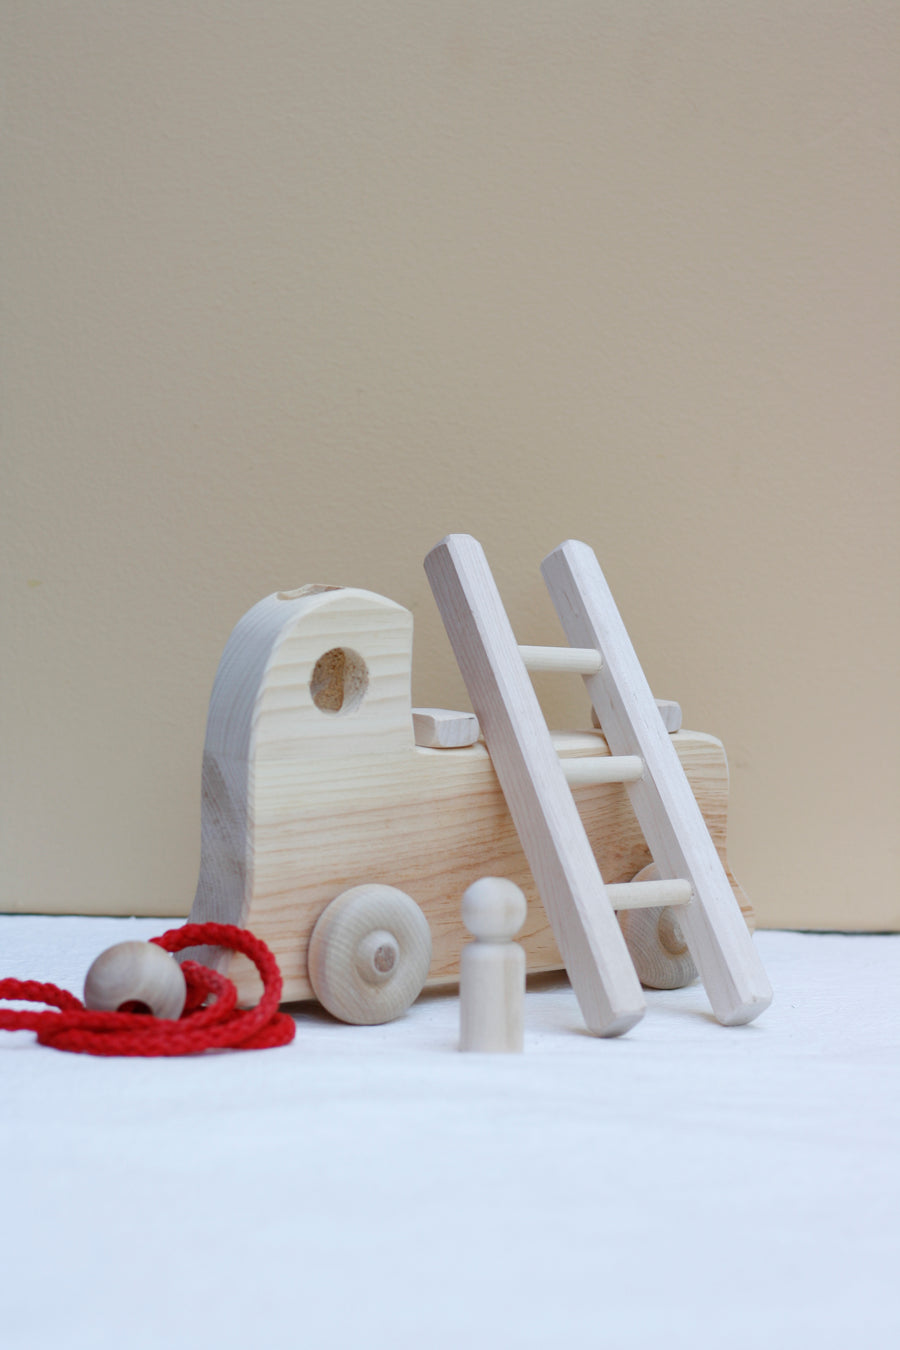 Wooden fire truck by Thorpe Toys